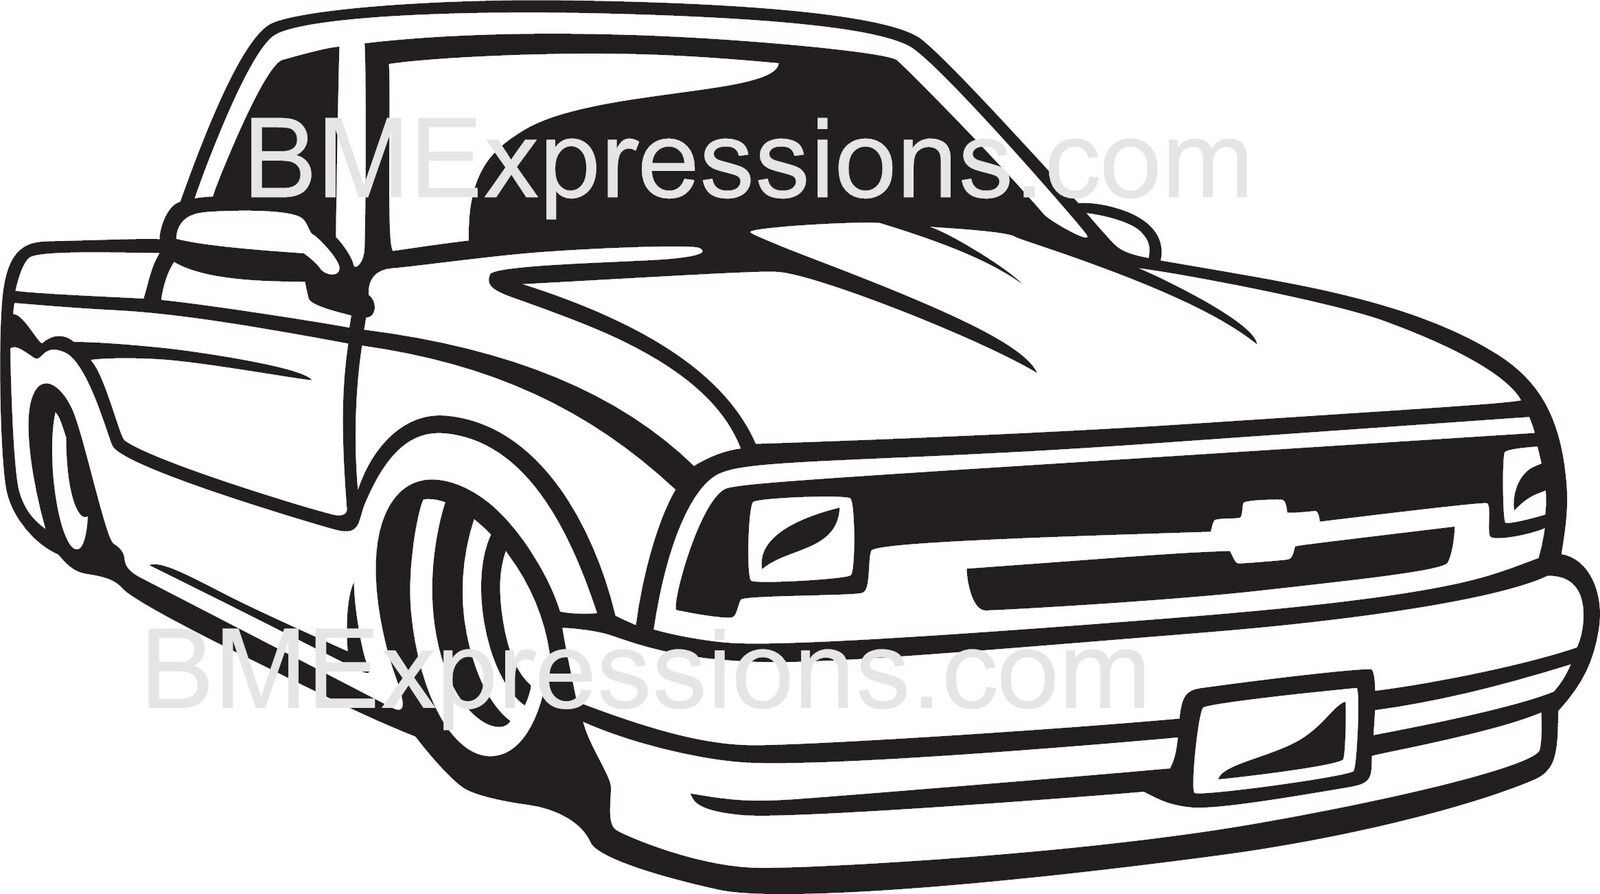 Chevy s pickup lowrider chevrolet vinyl decal your color choice sticker